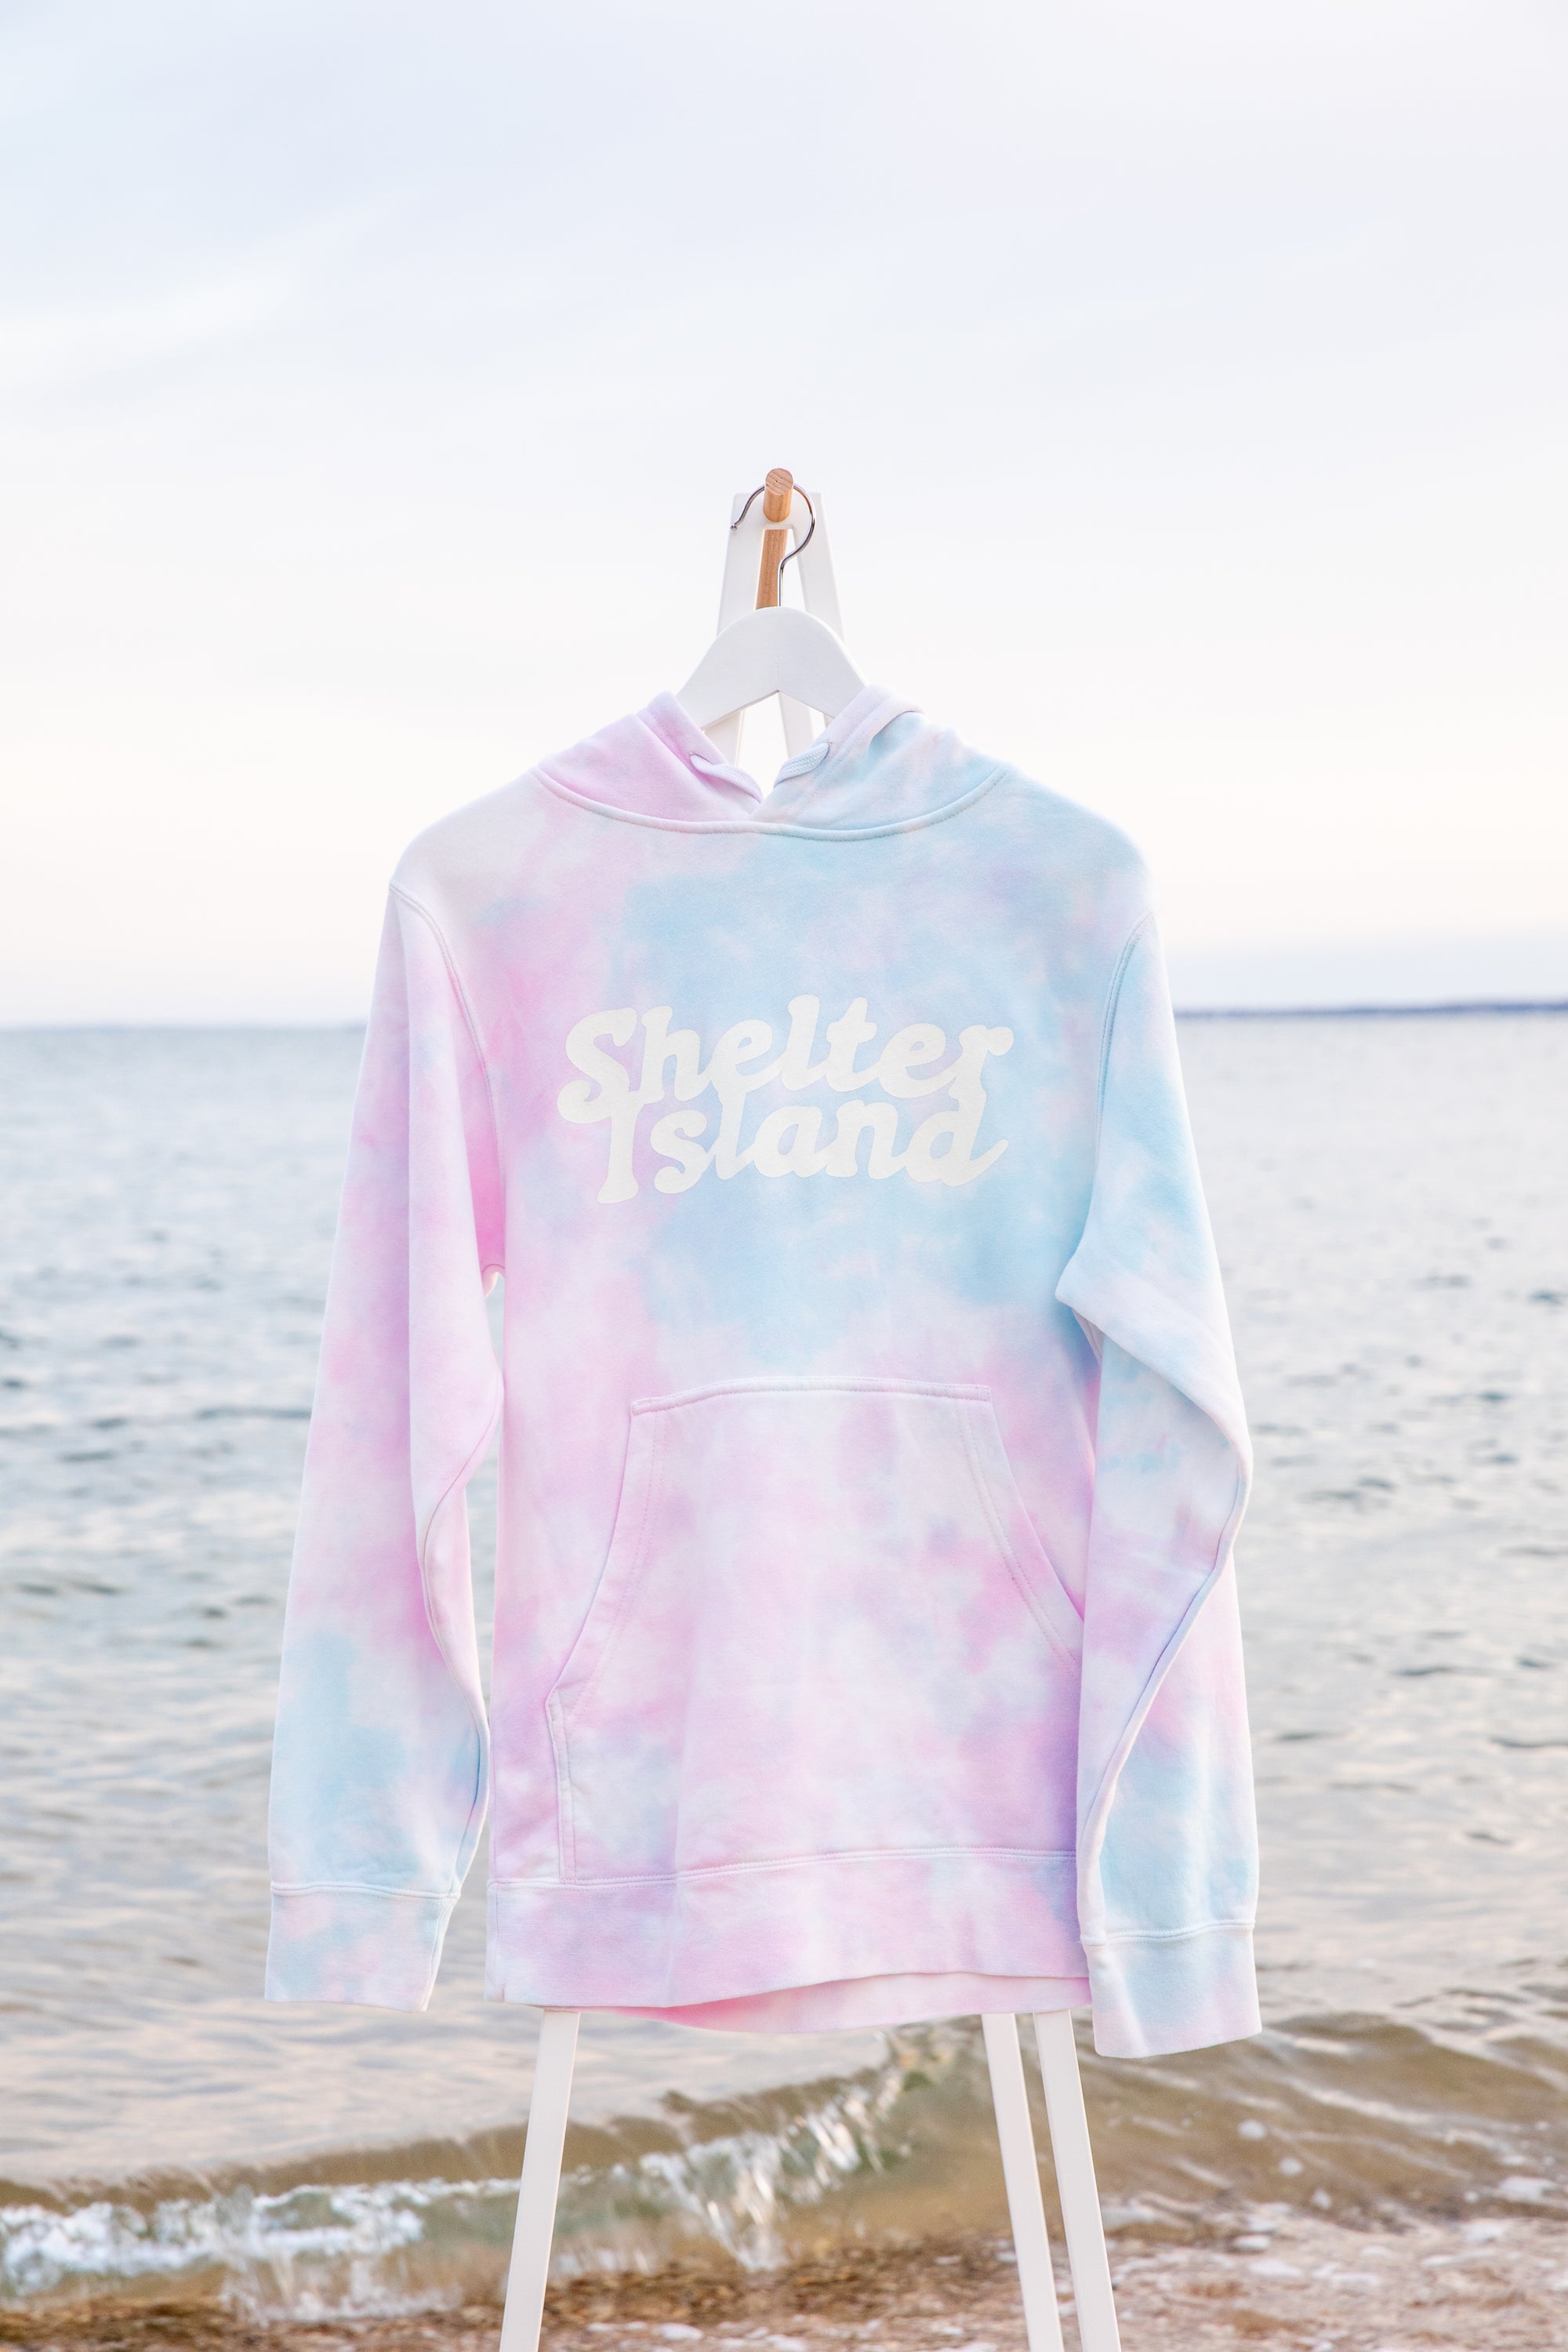 Shelter Island tie dye hoodie by Shelter Island Online Clothing Boutique, Shelter Isle